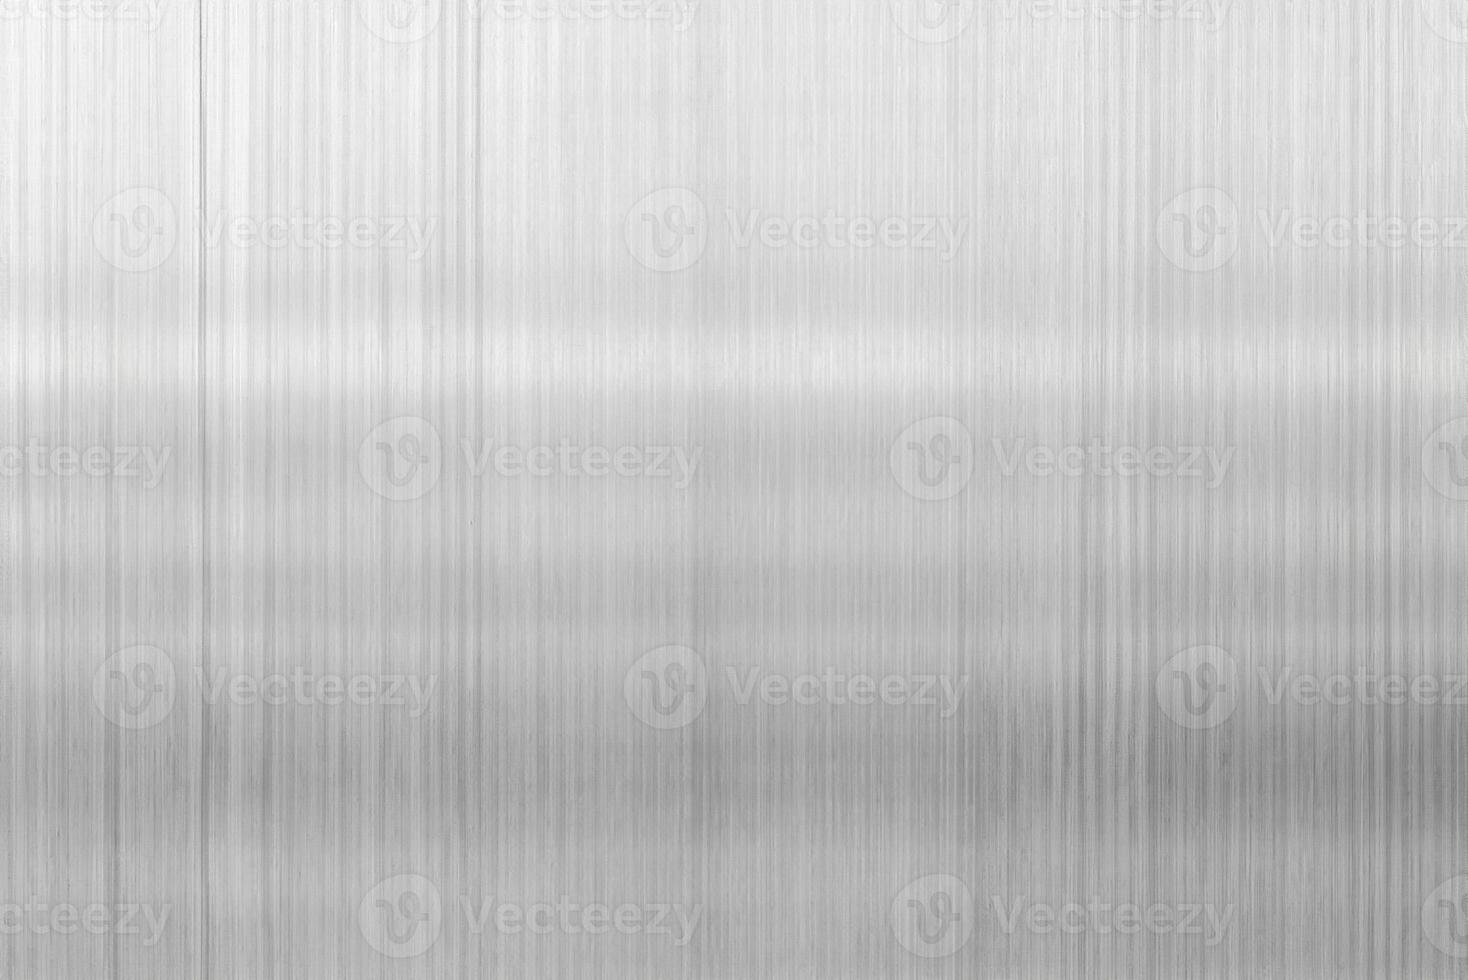 Abstract Metallic Texture, Brushed Steel Plate Background. photo